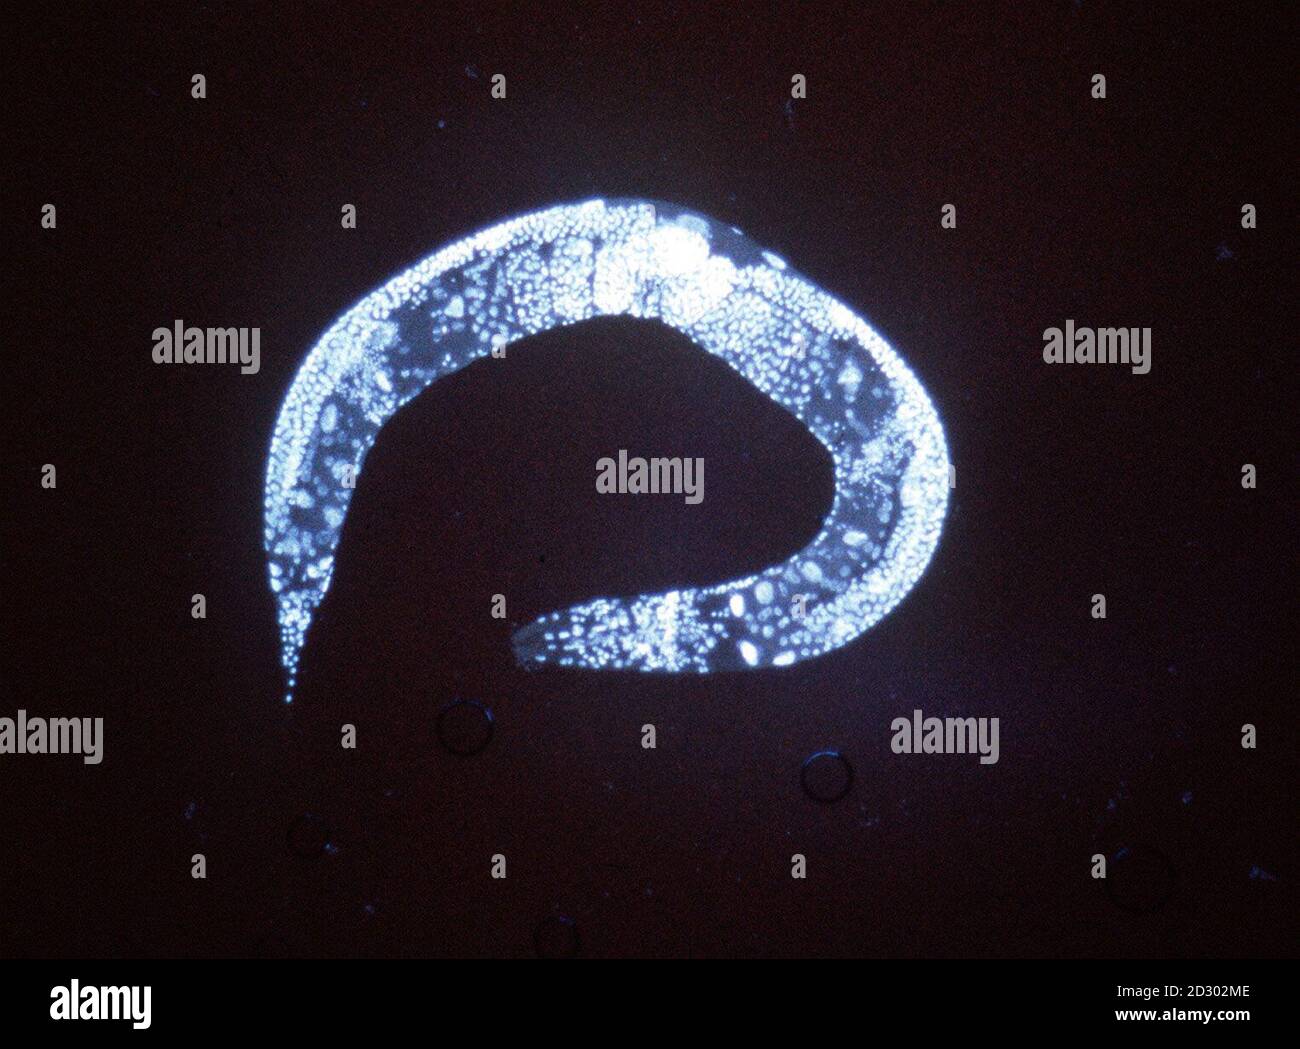 Embargoed to 2100, Thursday, December 10: A microscopic view of  Caenorhabditis elegans, a humble nematode worm less than one millimetre long, which   has aided scientists in unravelling the mystery of life.  Spelling out all the genetic instructions that determine how the worm is made,  is an enormous achievement. It took British and American scientists 15 years and cost more than  30 million.   The creature has a 'genome', or genetic codebook, containing 97 million chemical 'letters'.   Some of these are arranged in sequences to form an estimated 20,000 genes, the instructions for making dif Stock Photo